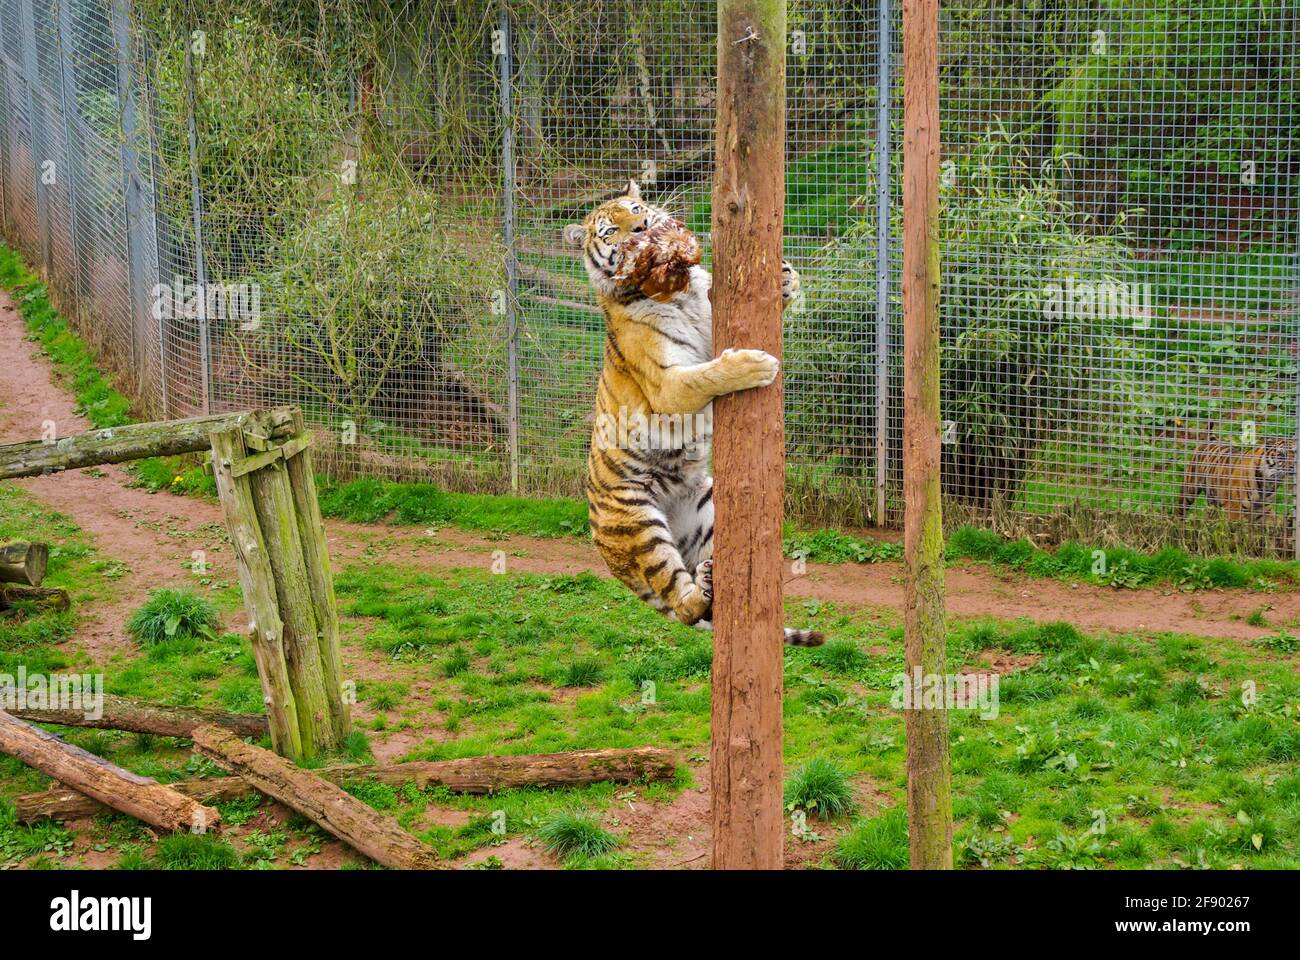 Tiger at South Lakes Safari Zoo, formerly South Lakes Wild Animal Park. In 2013 a tiger fatally mauled a zoo employee. Climbing pole at feeding time Stock Photo